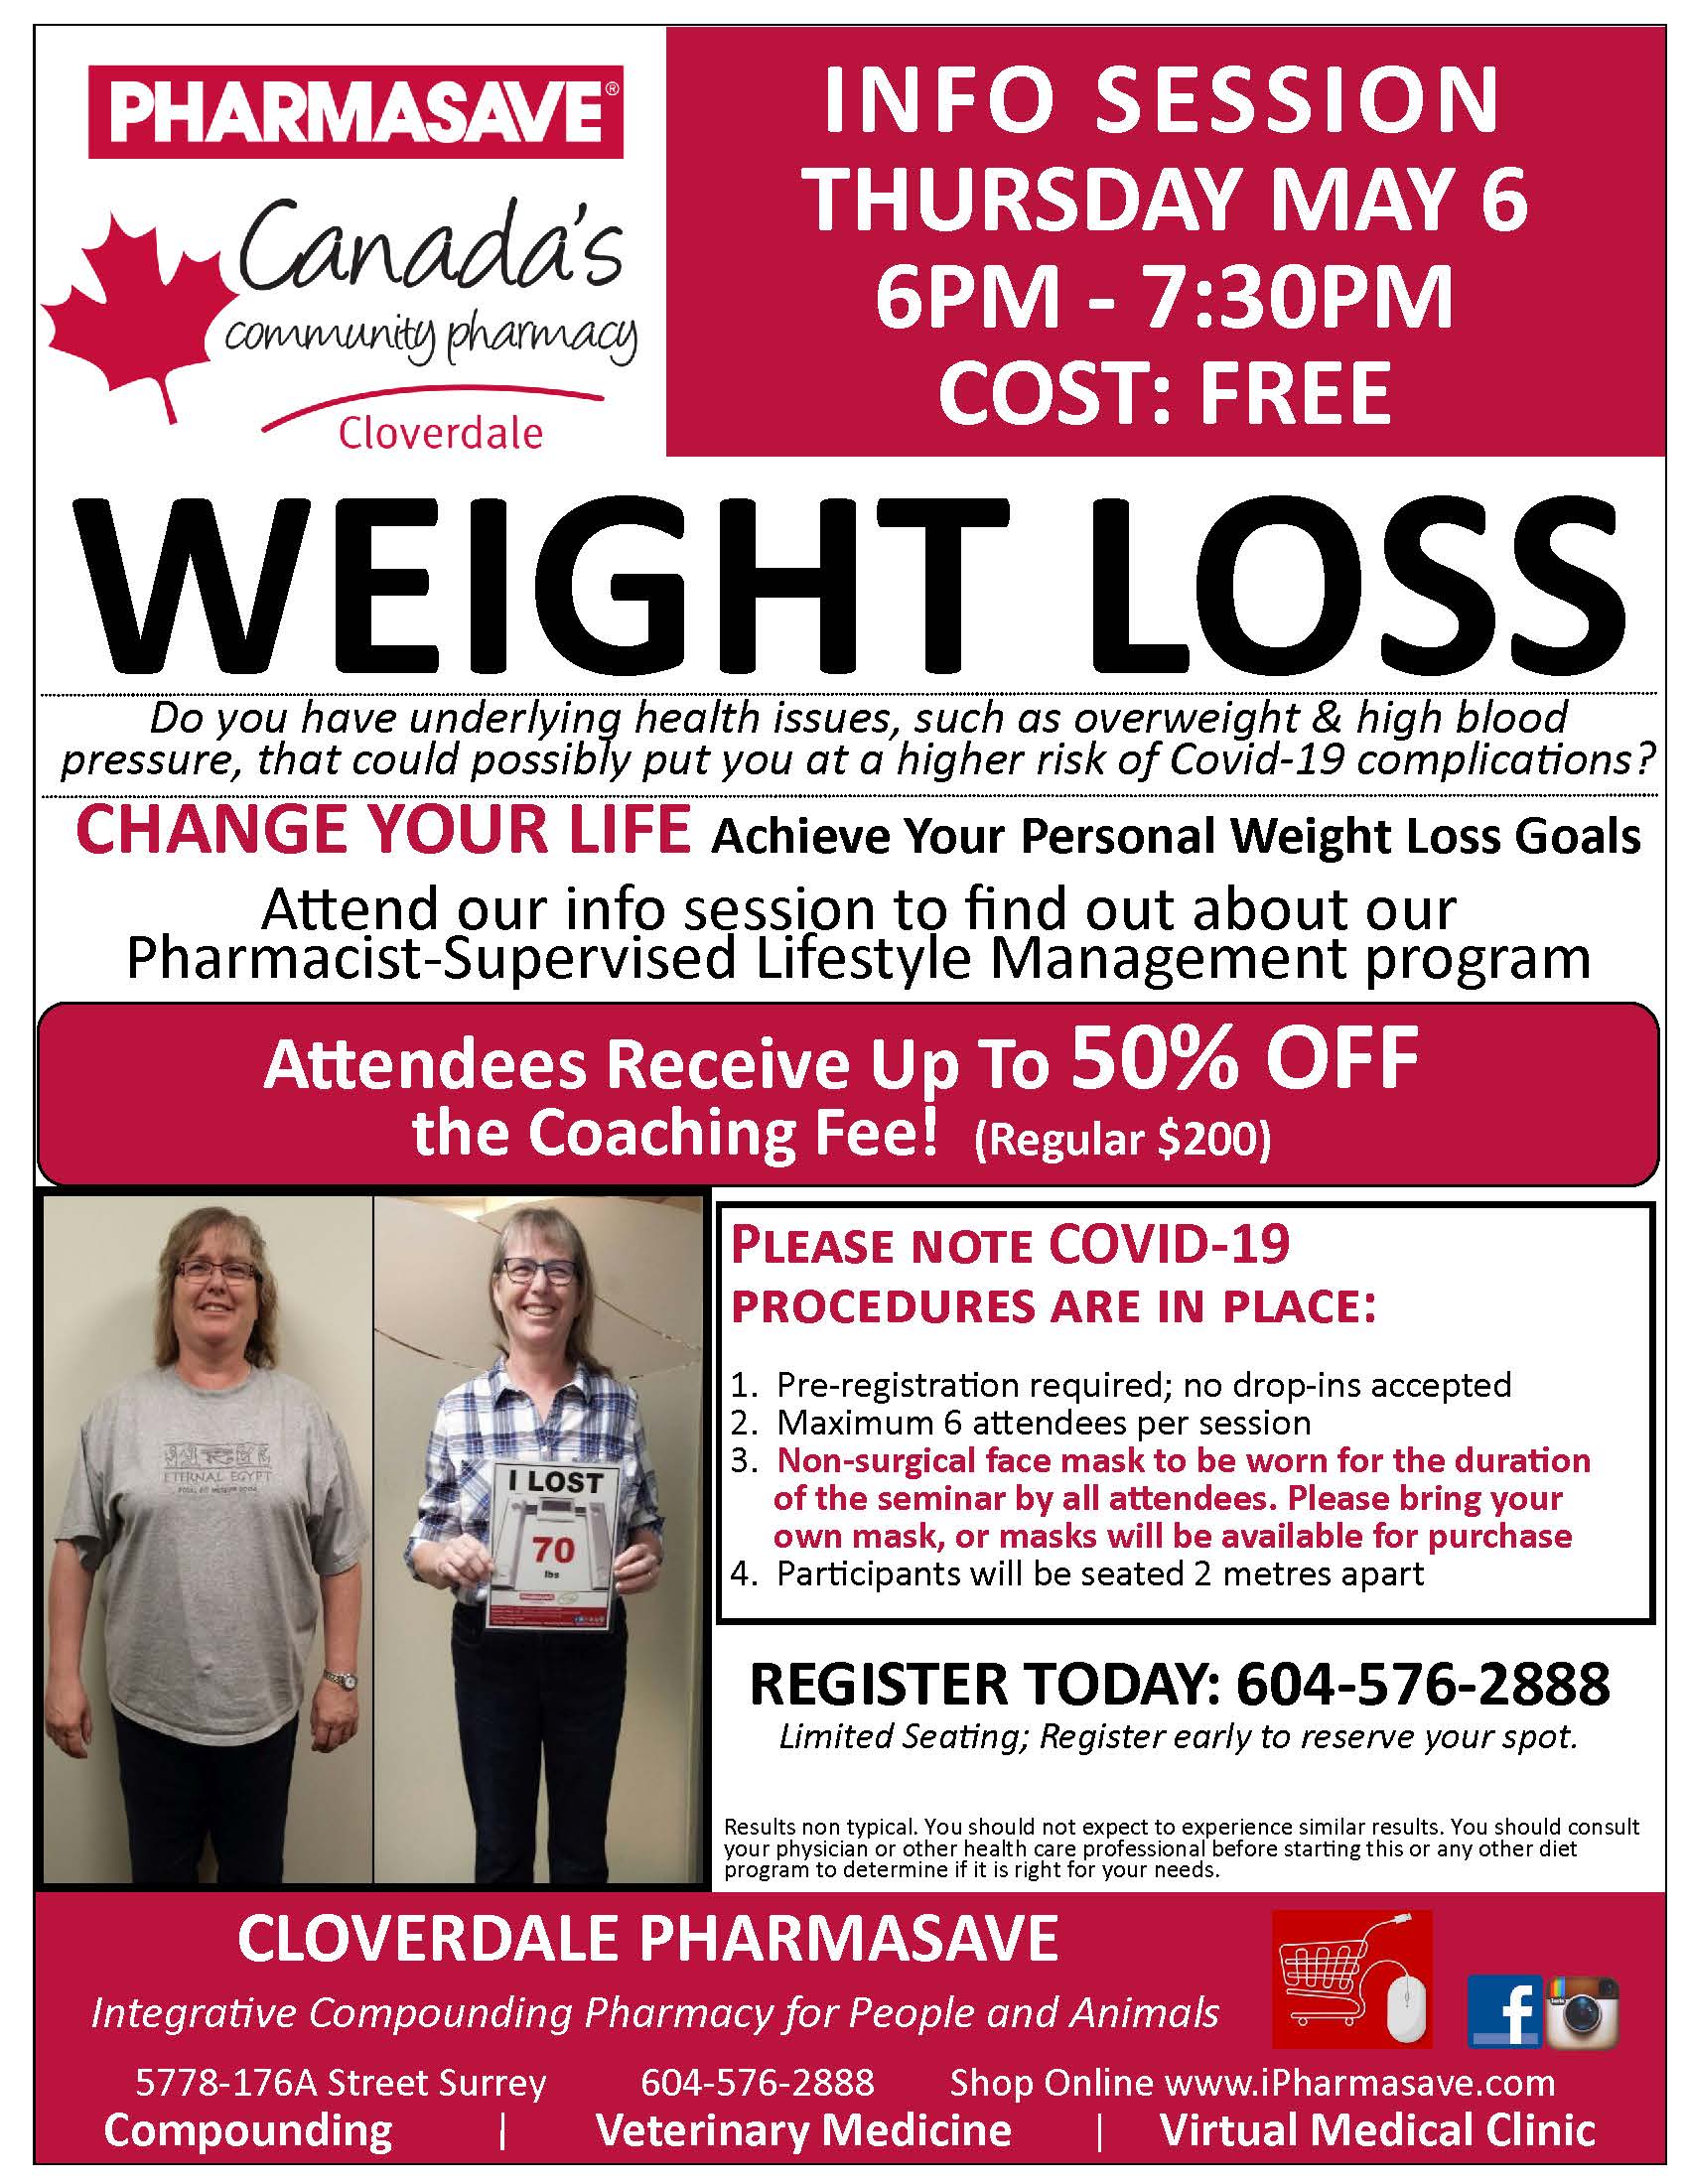 weight loss info session flyer